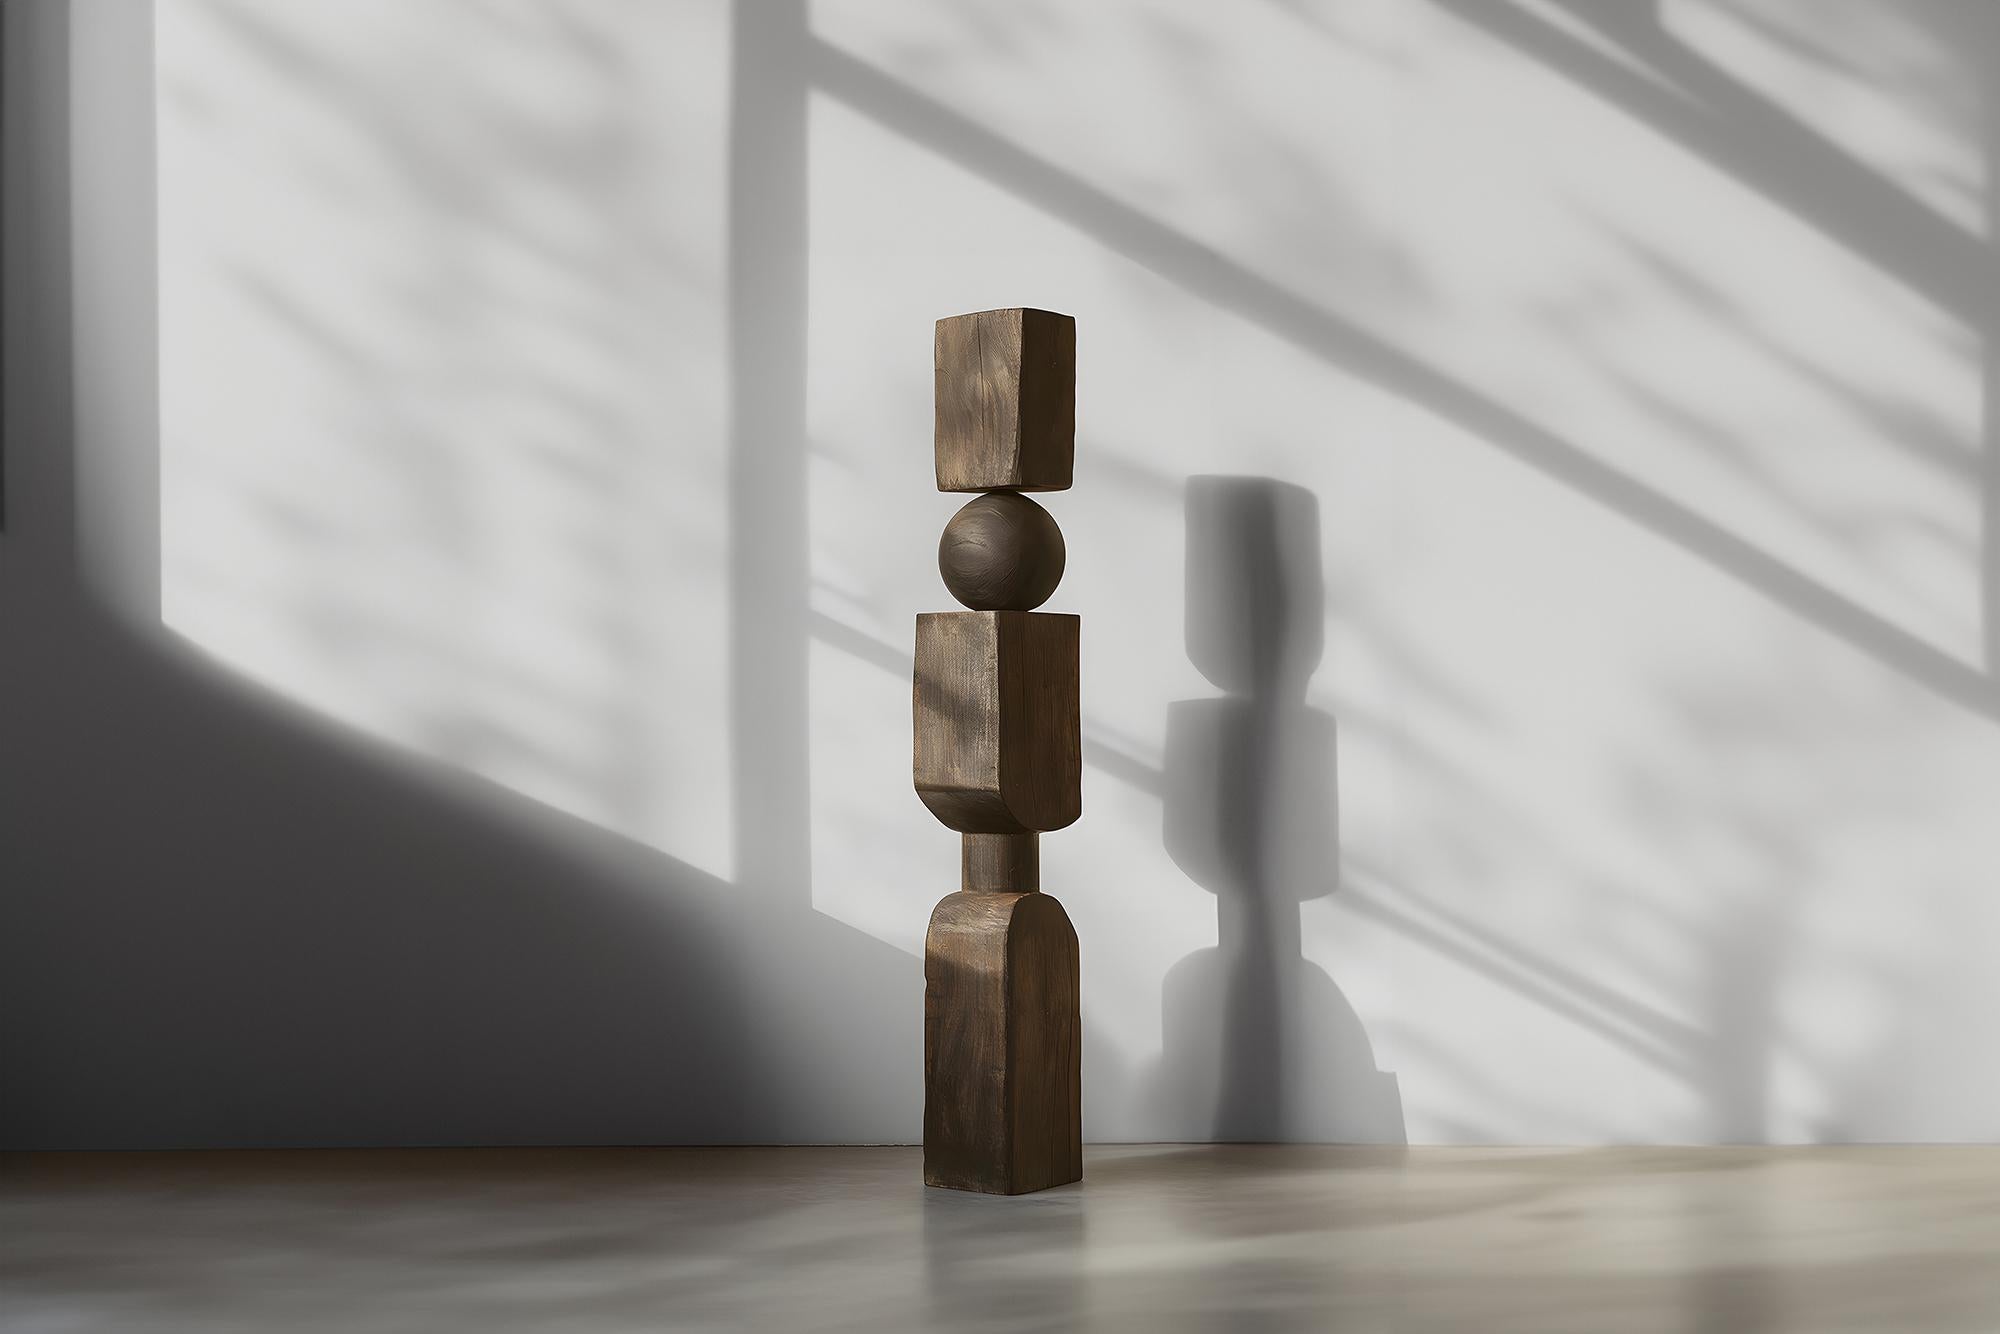 A Sleek, Dark Burned Oak Totem, Carved into Modern Art, NONO's Still Stand No99

_
Joel Escalona's wooden standing sculptures are objects of raw beauty and serene grace. Each one is a testament to the power of the material, with smooth curves that